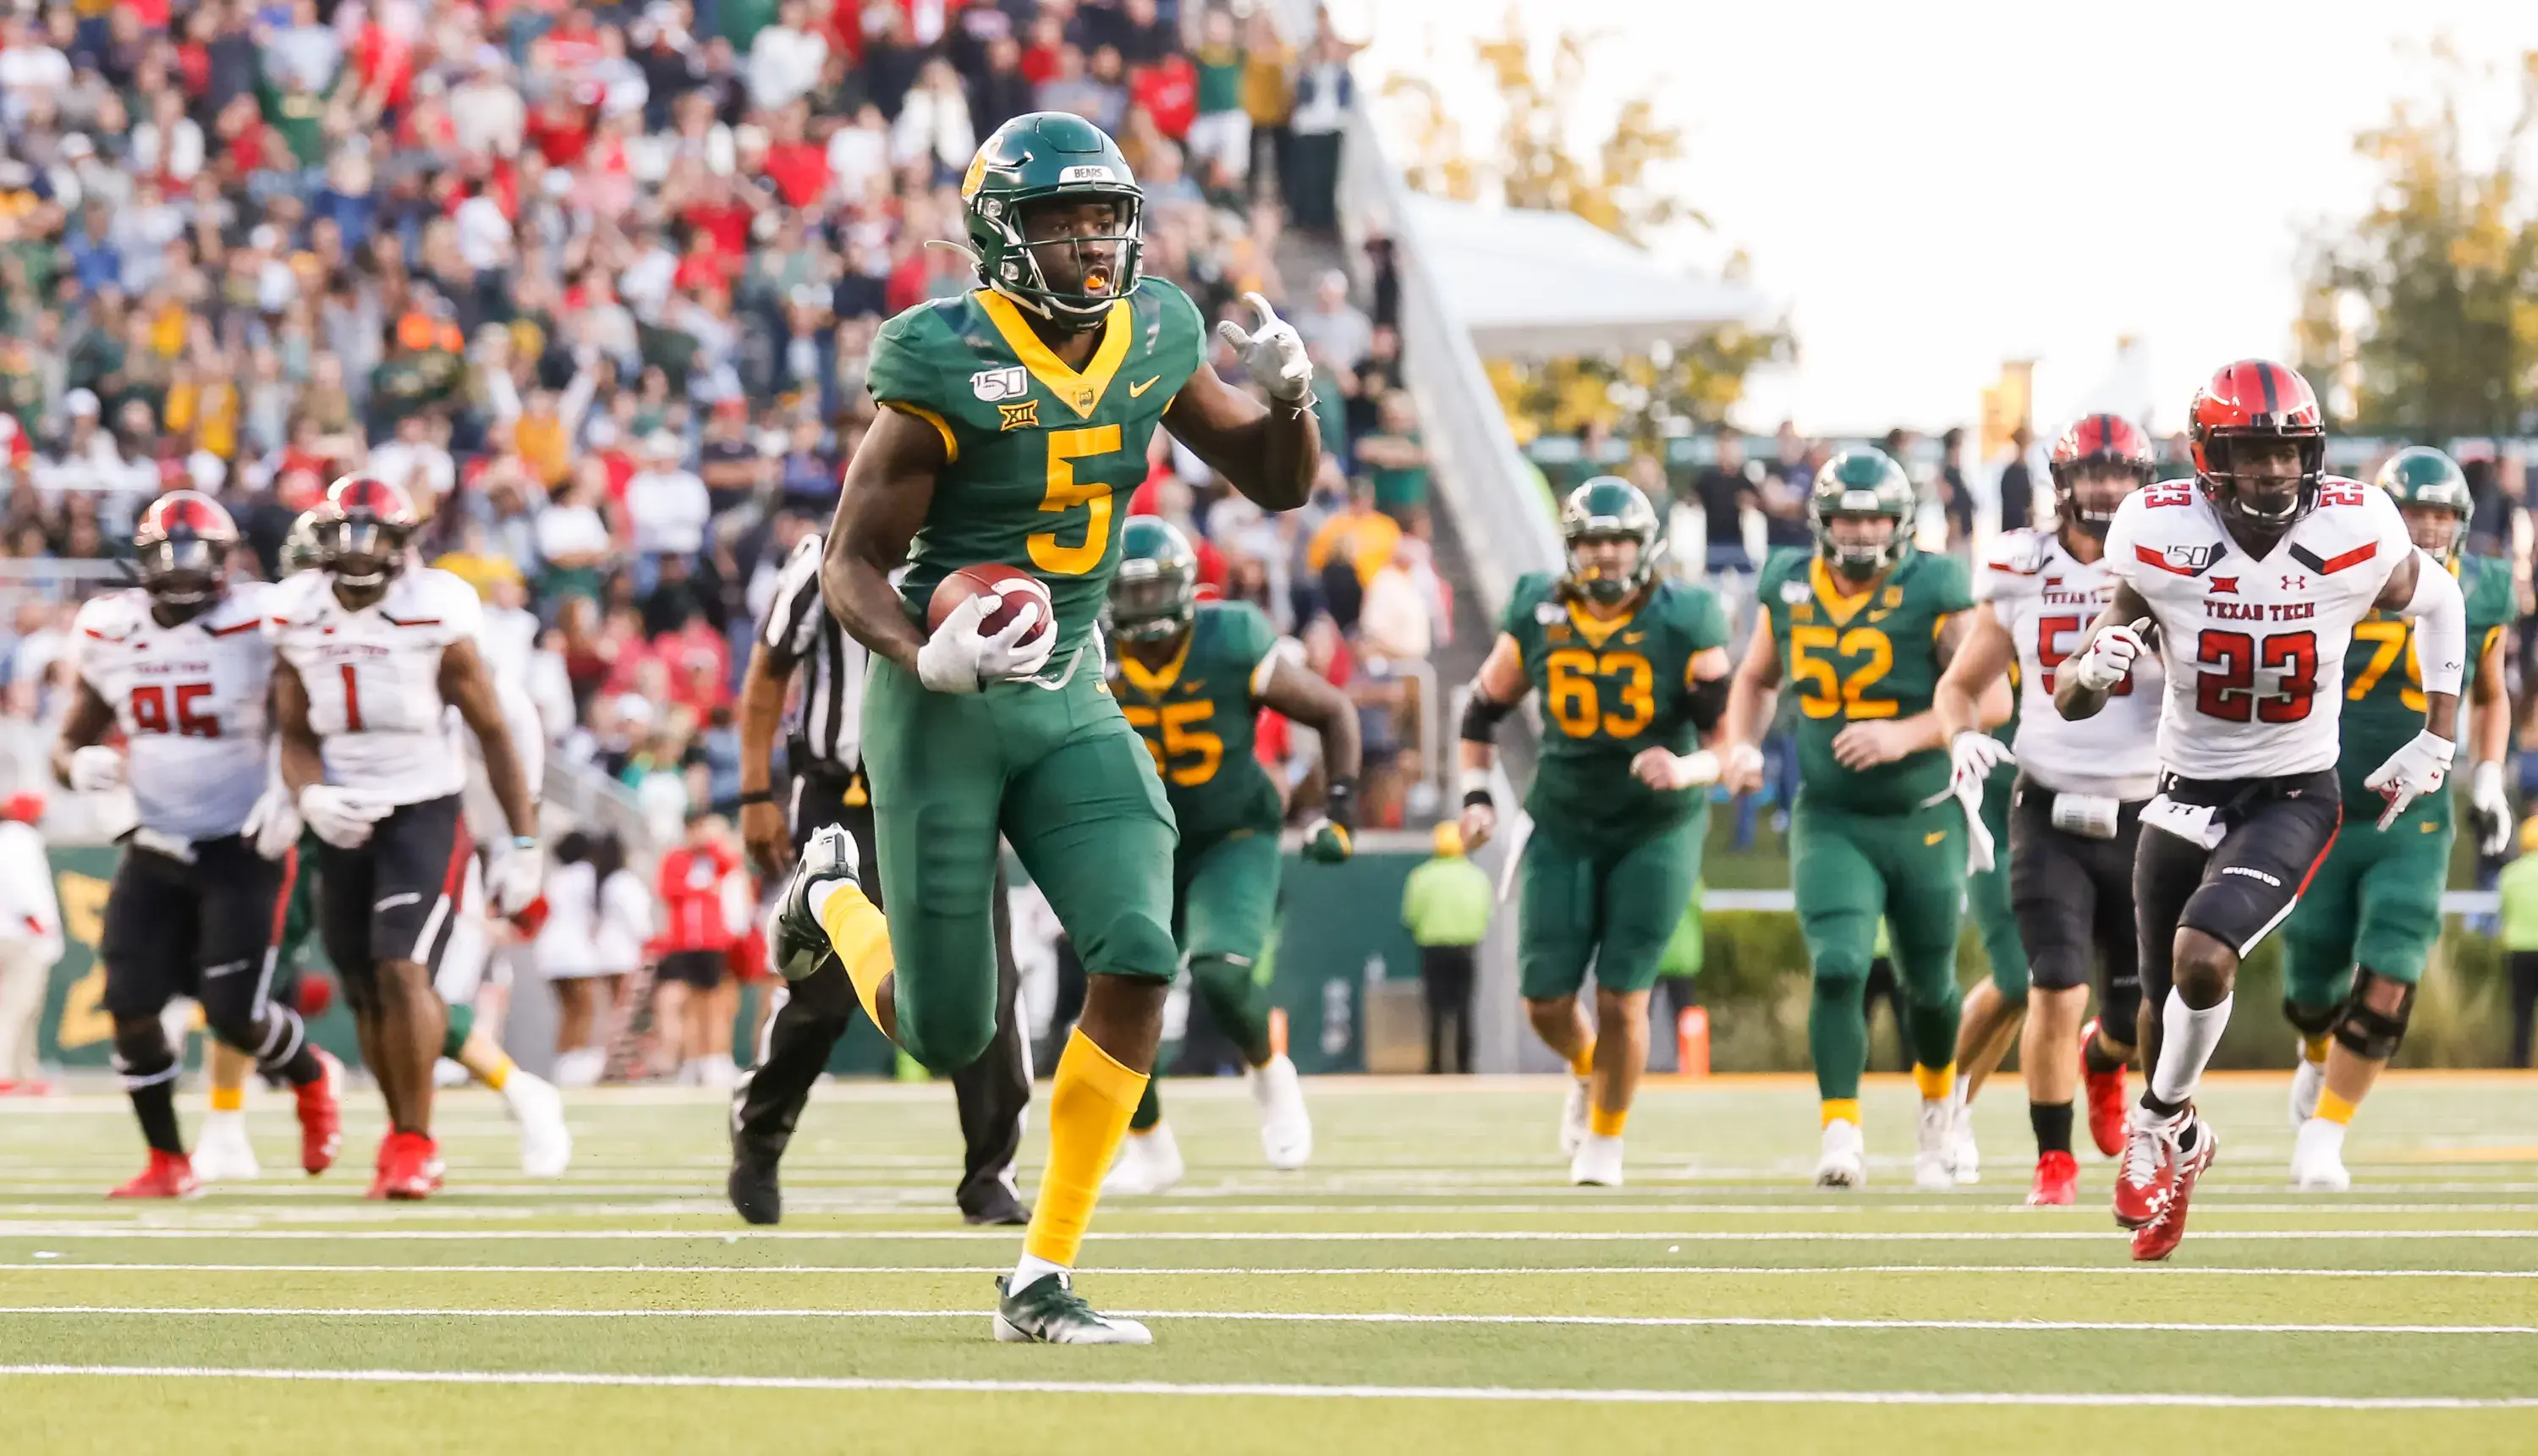 Oct 12, 2019; Waco, TX, USA; Baylor Bears wide receiver Denzel Mims (5) runs after the catch against the Texas Tech Red Raiders during the second half at McLane Stadium. Mandatory Credit: Ray Carlin-USA TODAY Sports / © Ray Carlin-USA TODAY Sports